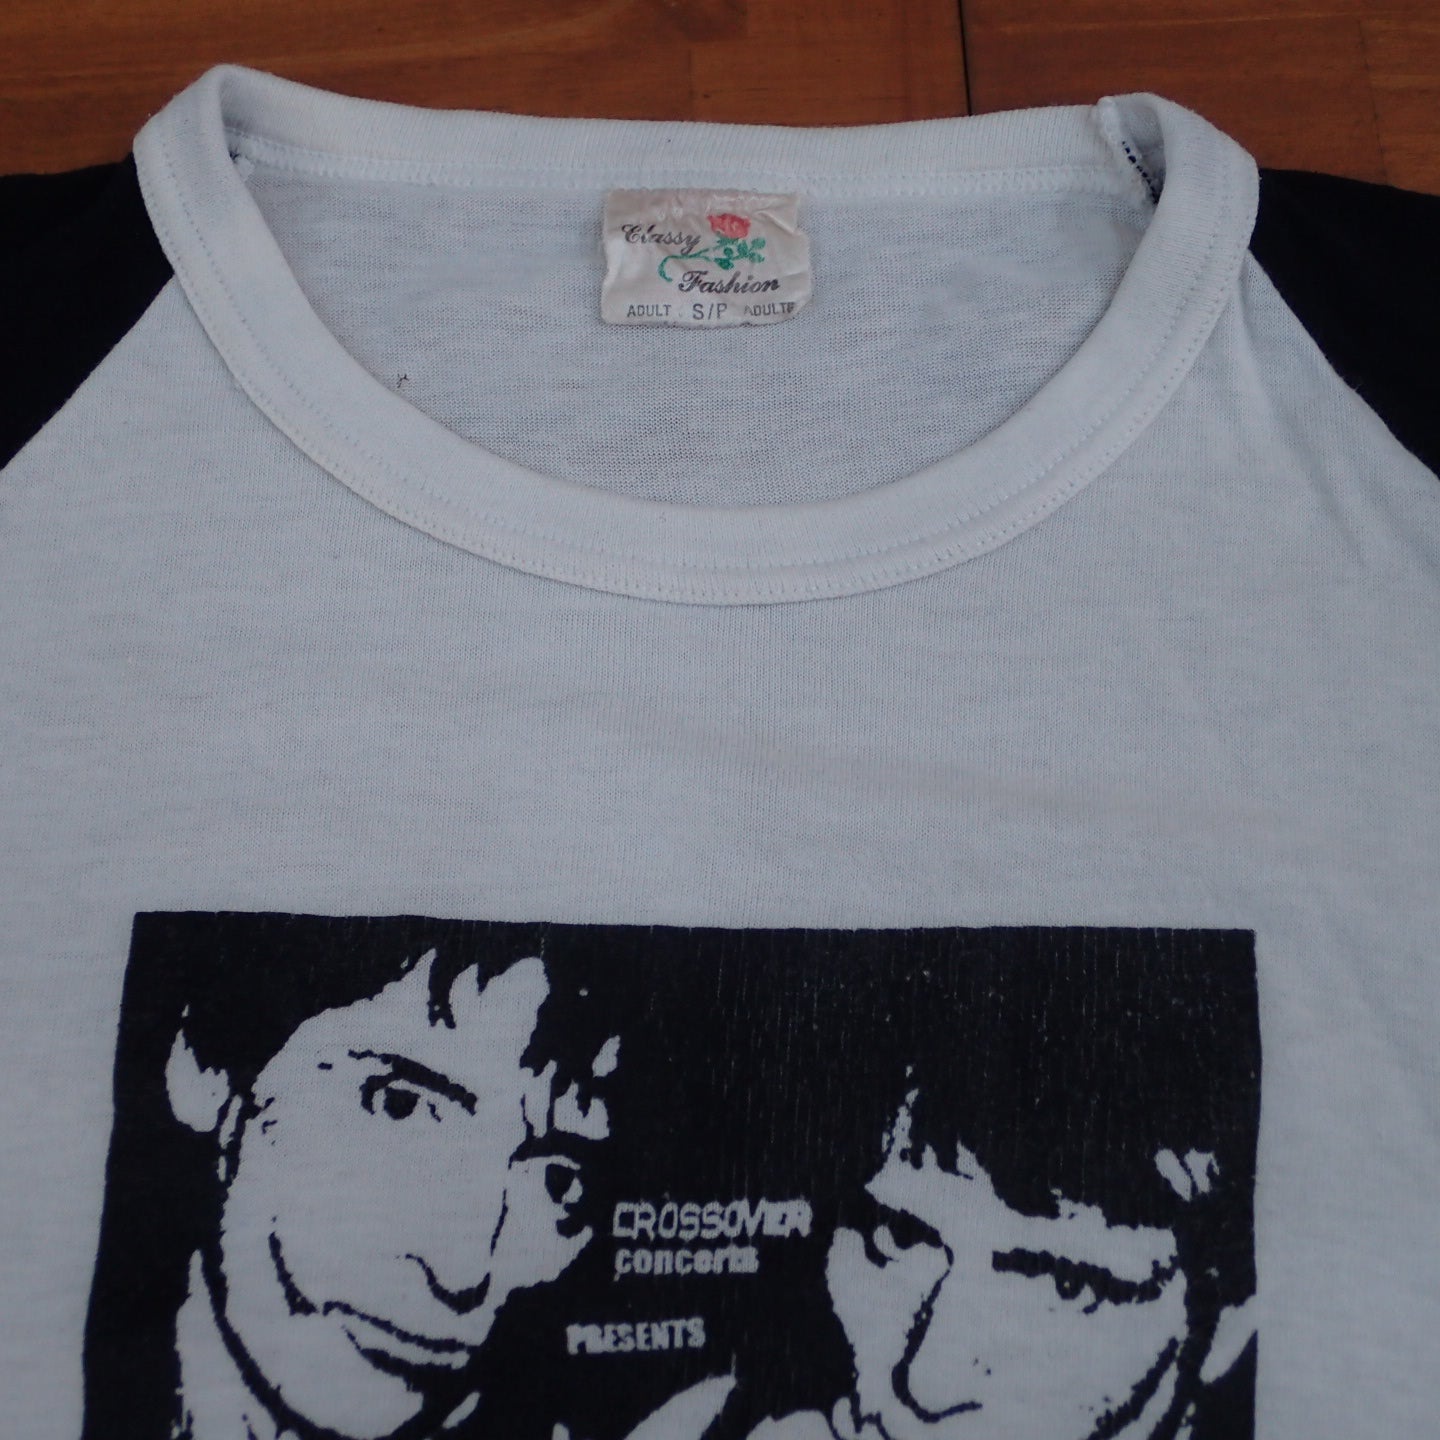 80s Johnny Thunders T-shirt "Live at Cameo Theatre Tee"